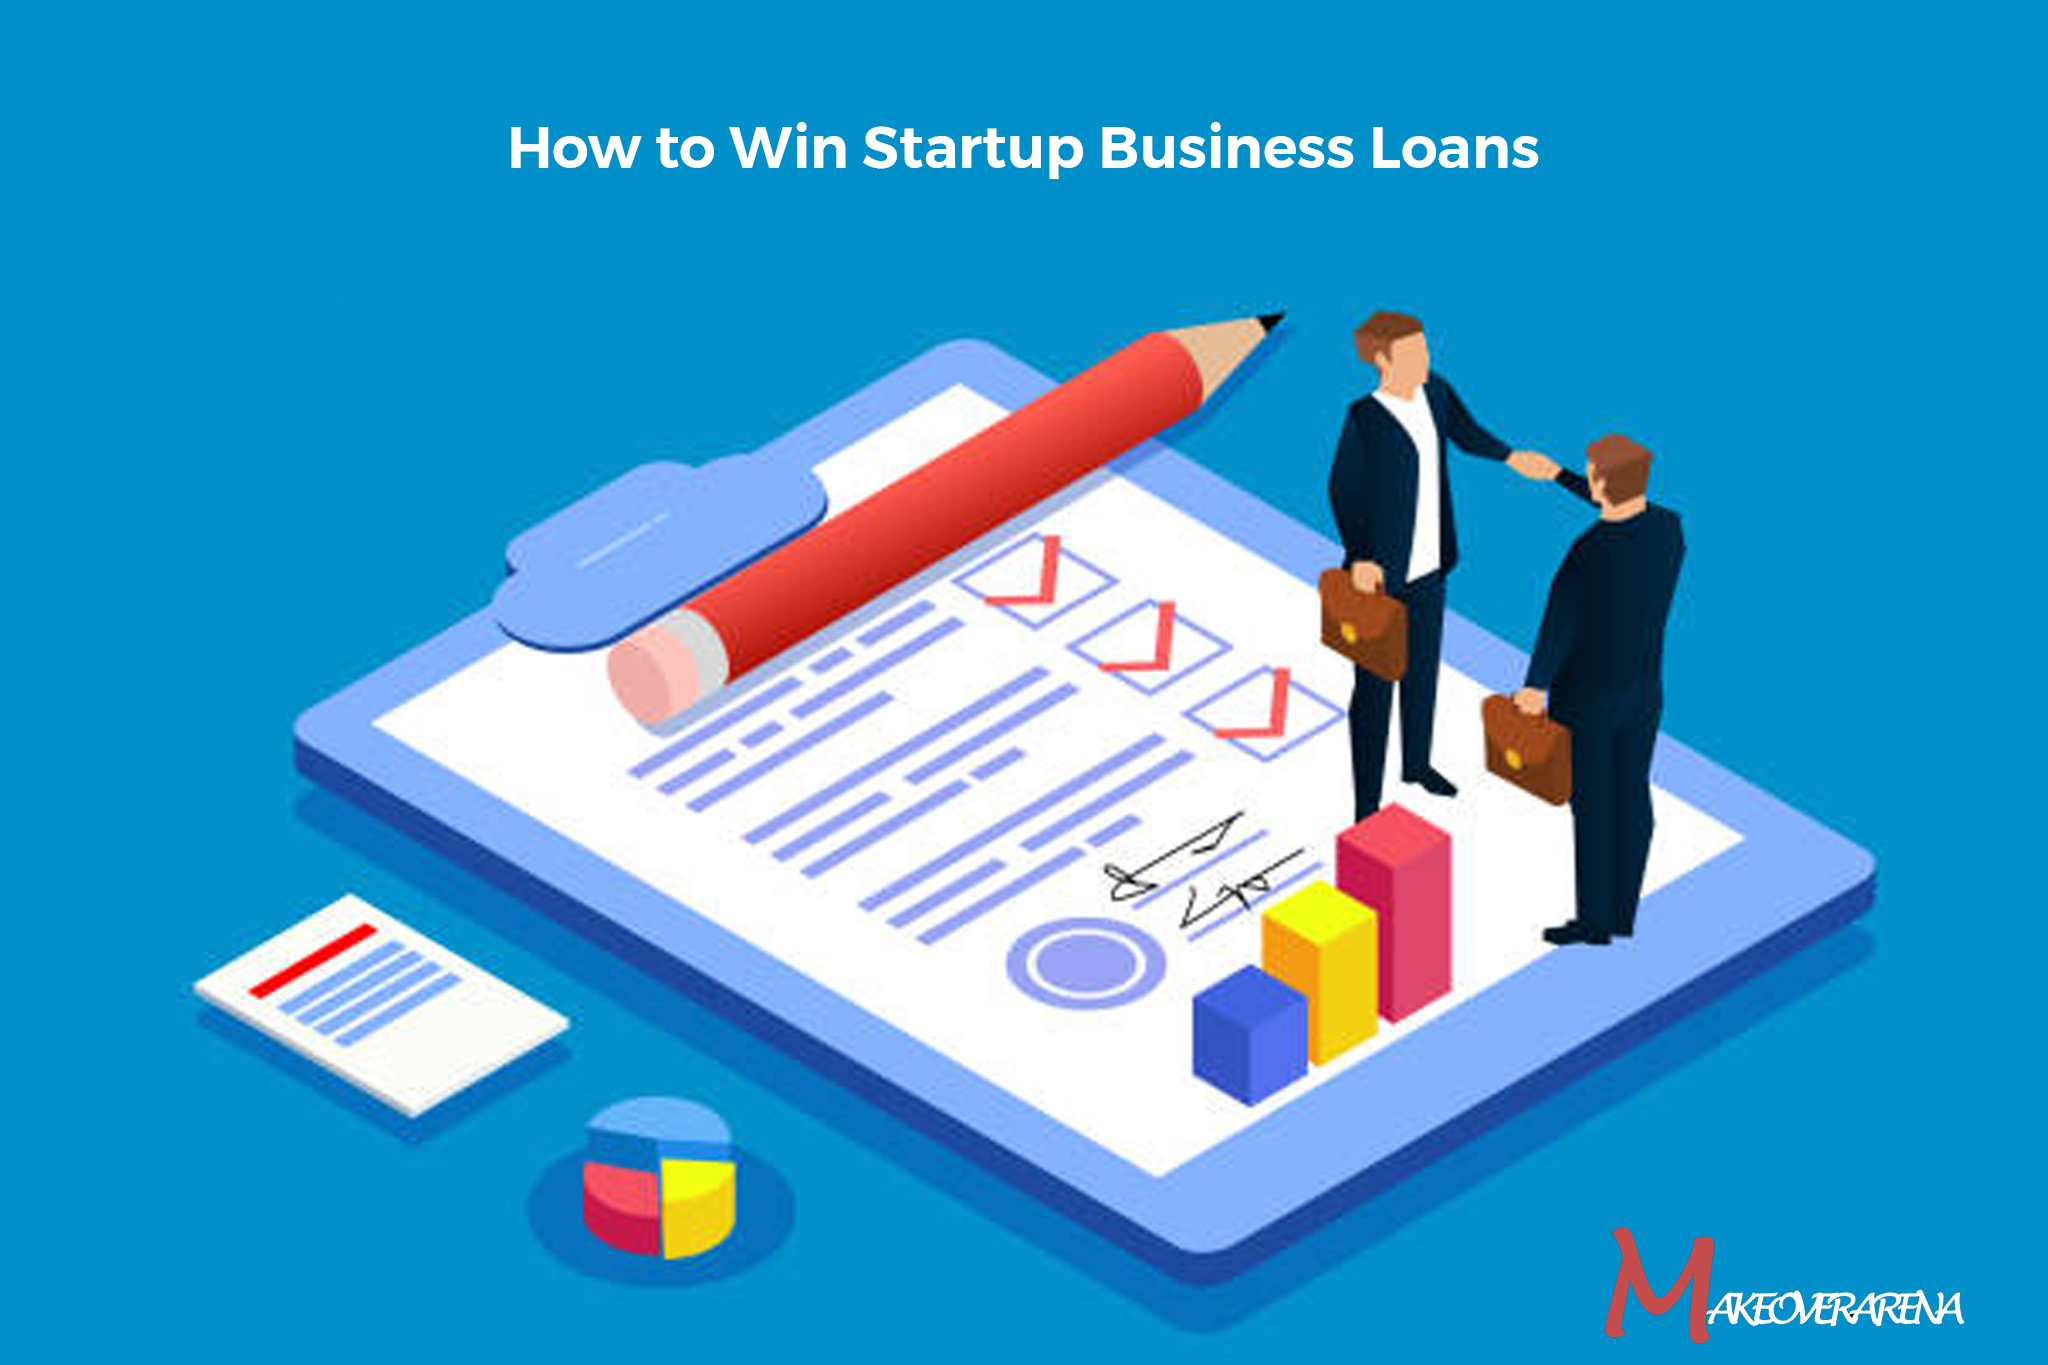 How to Win Startup Business Loans